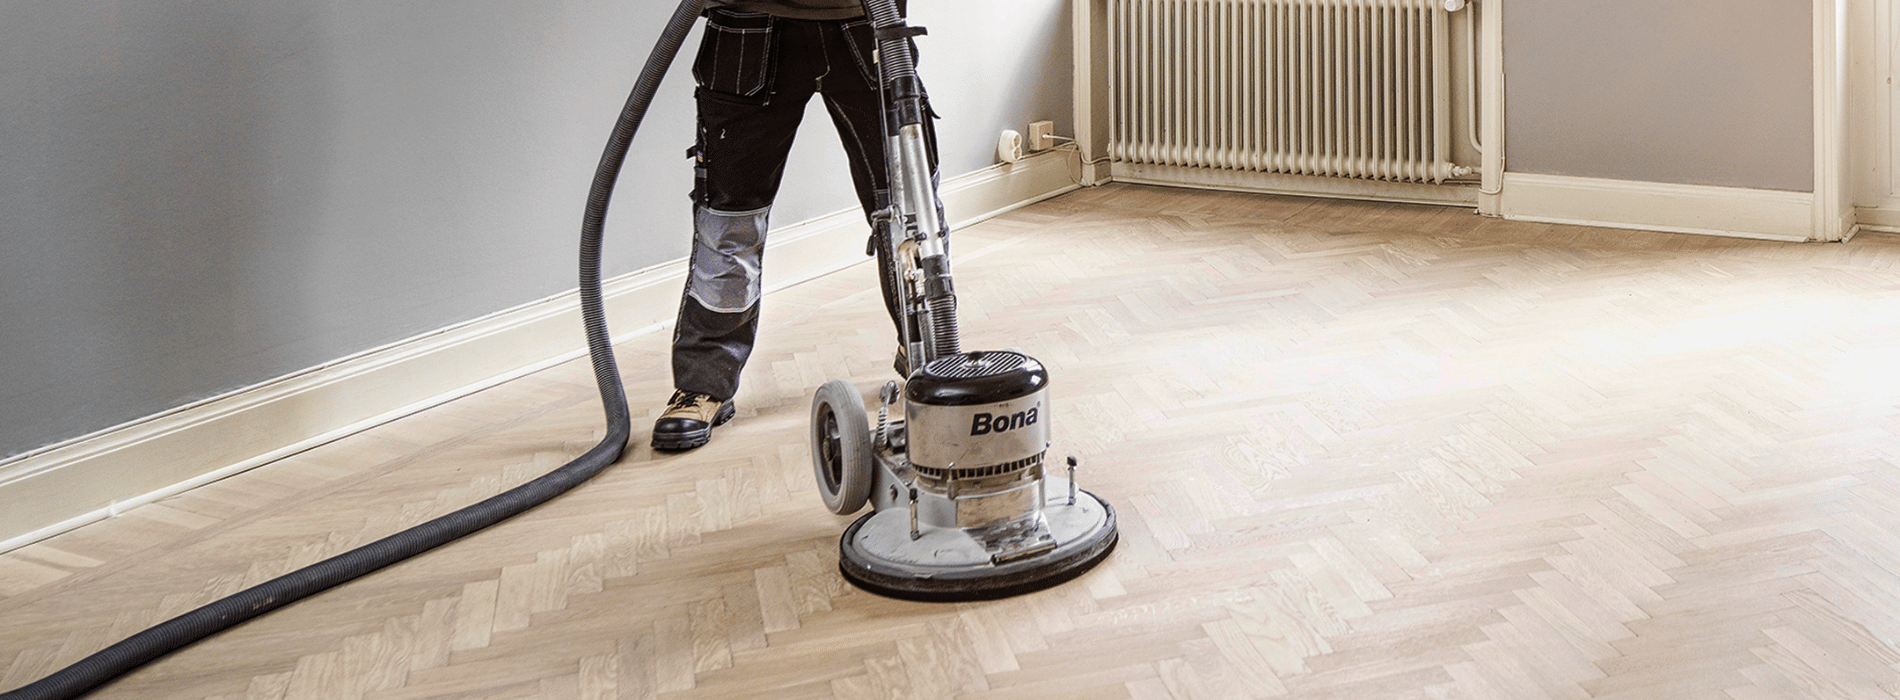 In Chelsea, SW10, Mr Sander® are using a Bona FlexiSand 1.9 buffer sander with Ø 407 mm dimension, 1.9 kW effect, 230 V voltage, and 50 Hz/60 Hz frequency. They connect it to a dust extraction system with a HEPA filter for clean and efficient results while sanding a parquet floor.